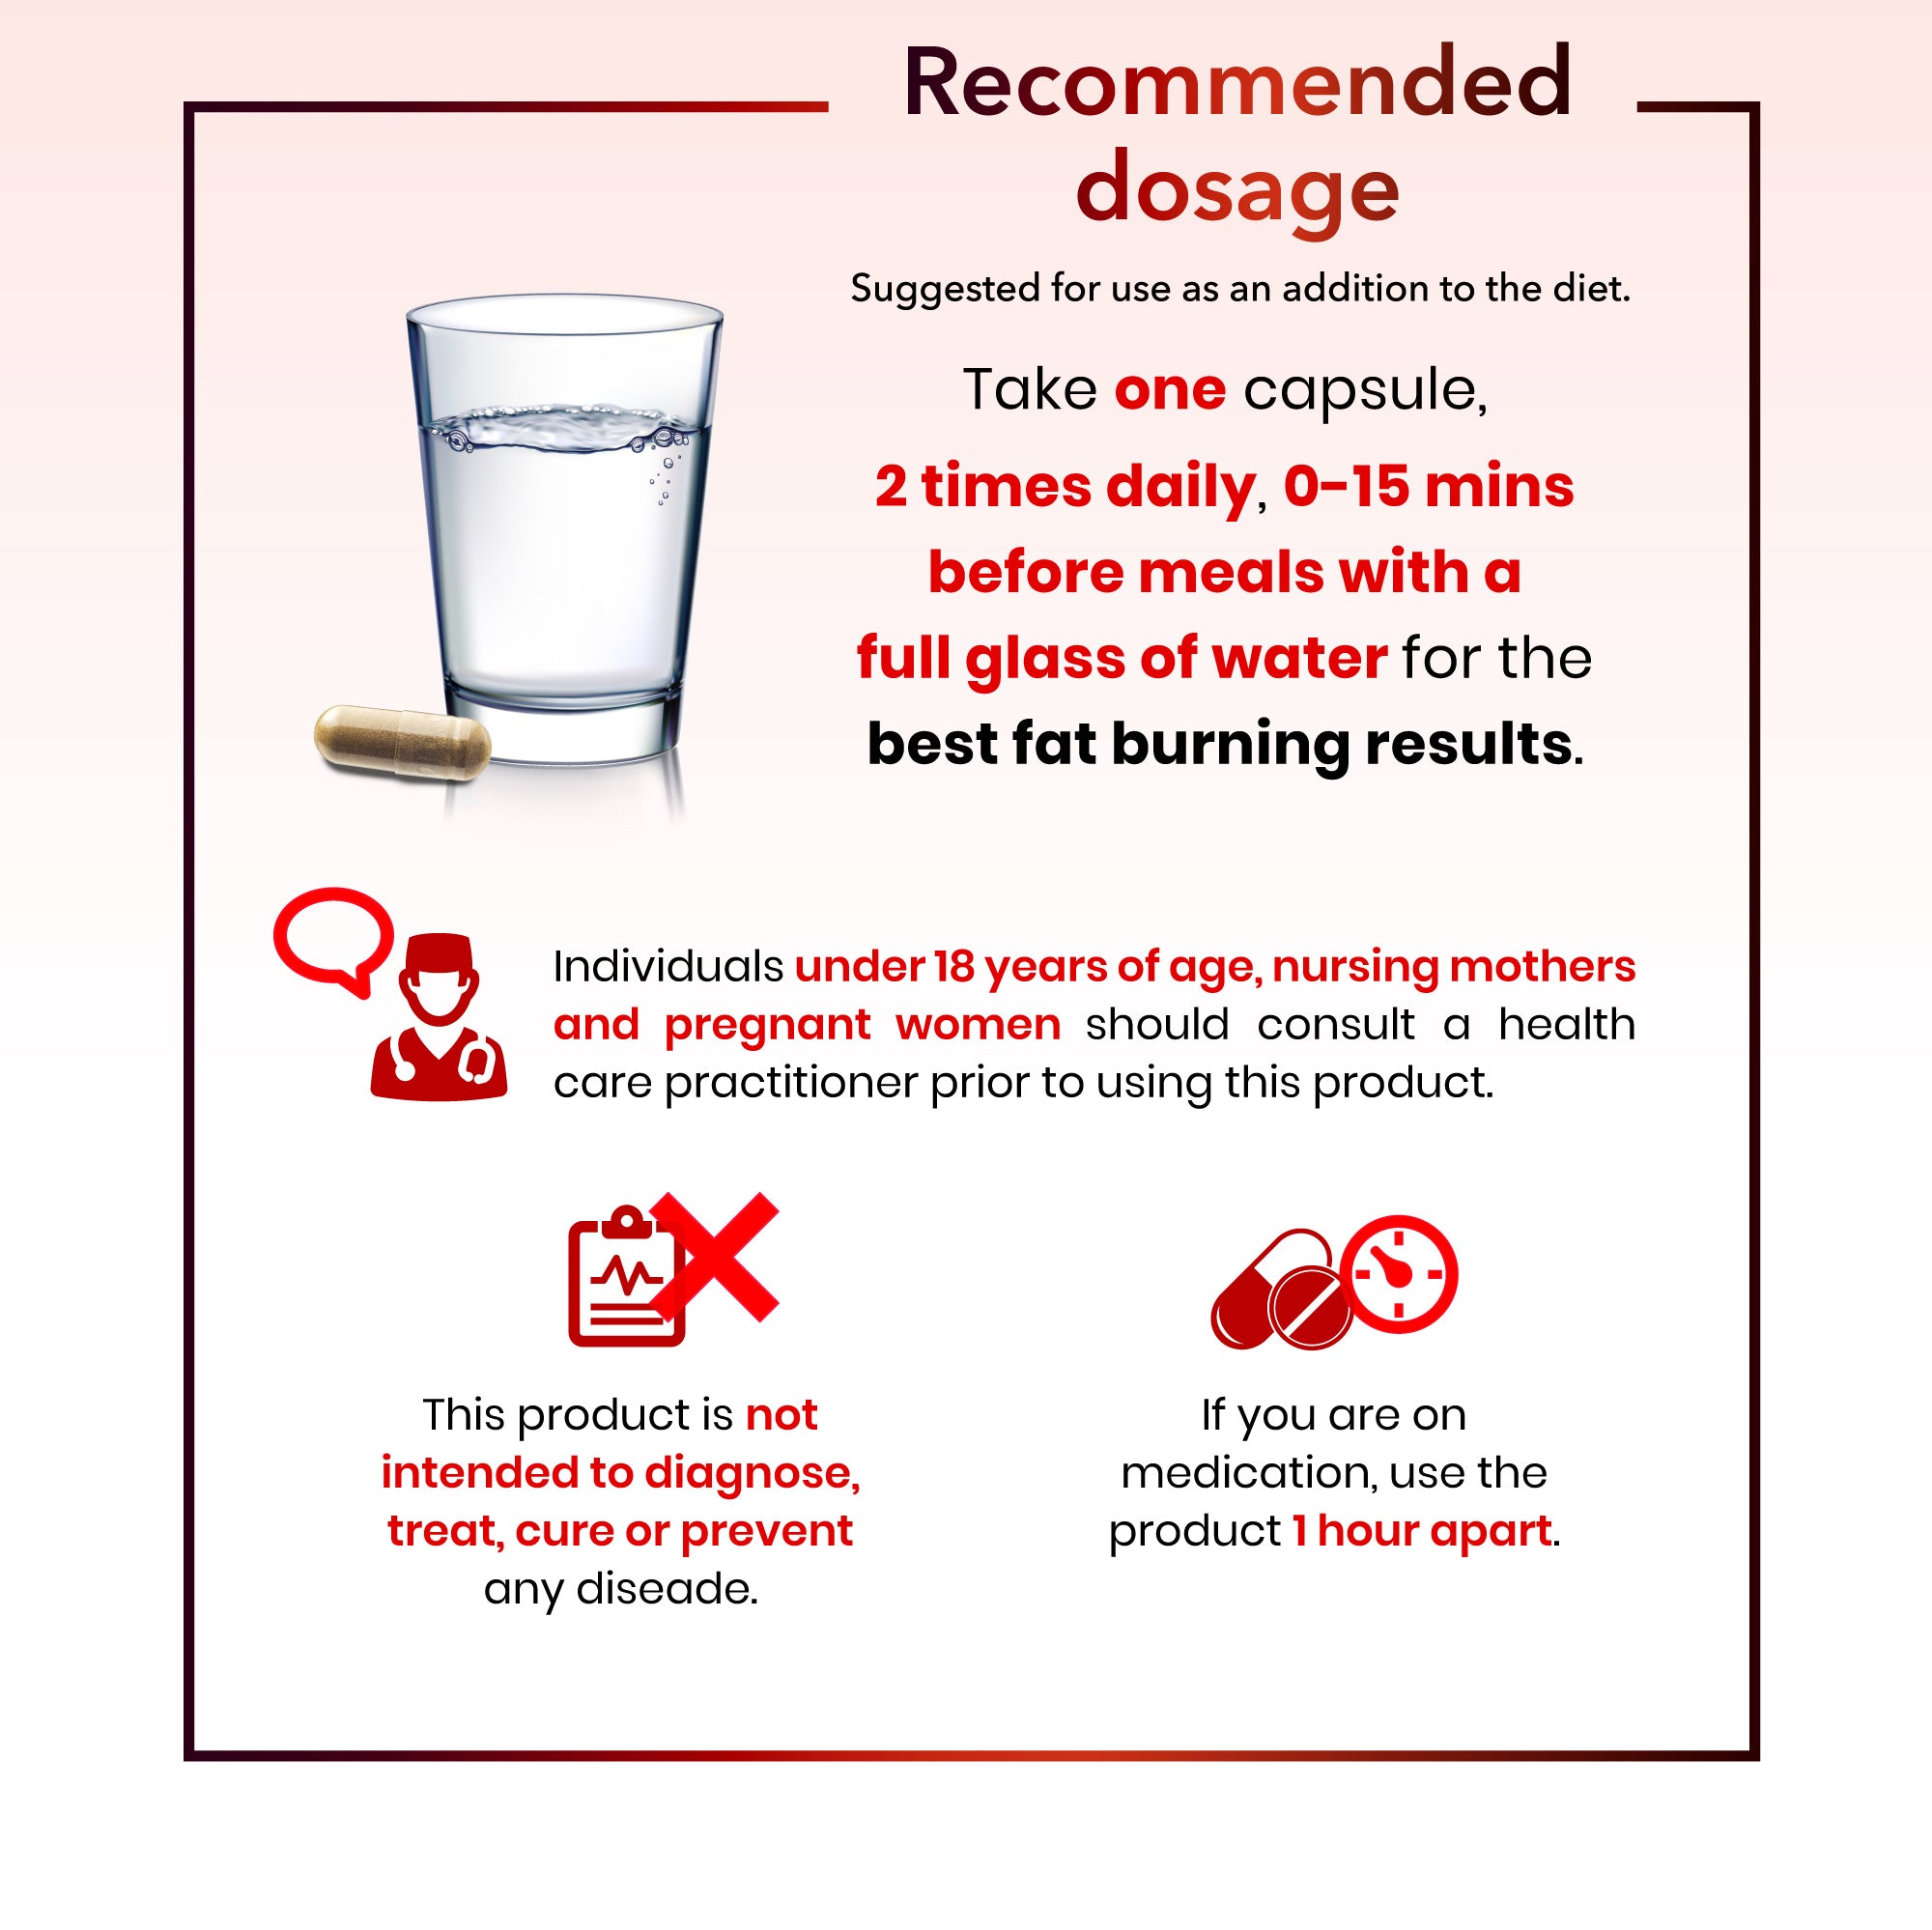 Consume one capsule two times daily, 0-15 minutes before meals with a full glass of water for the best fat burning results.